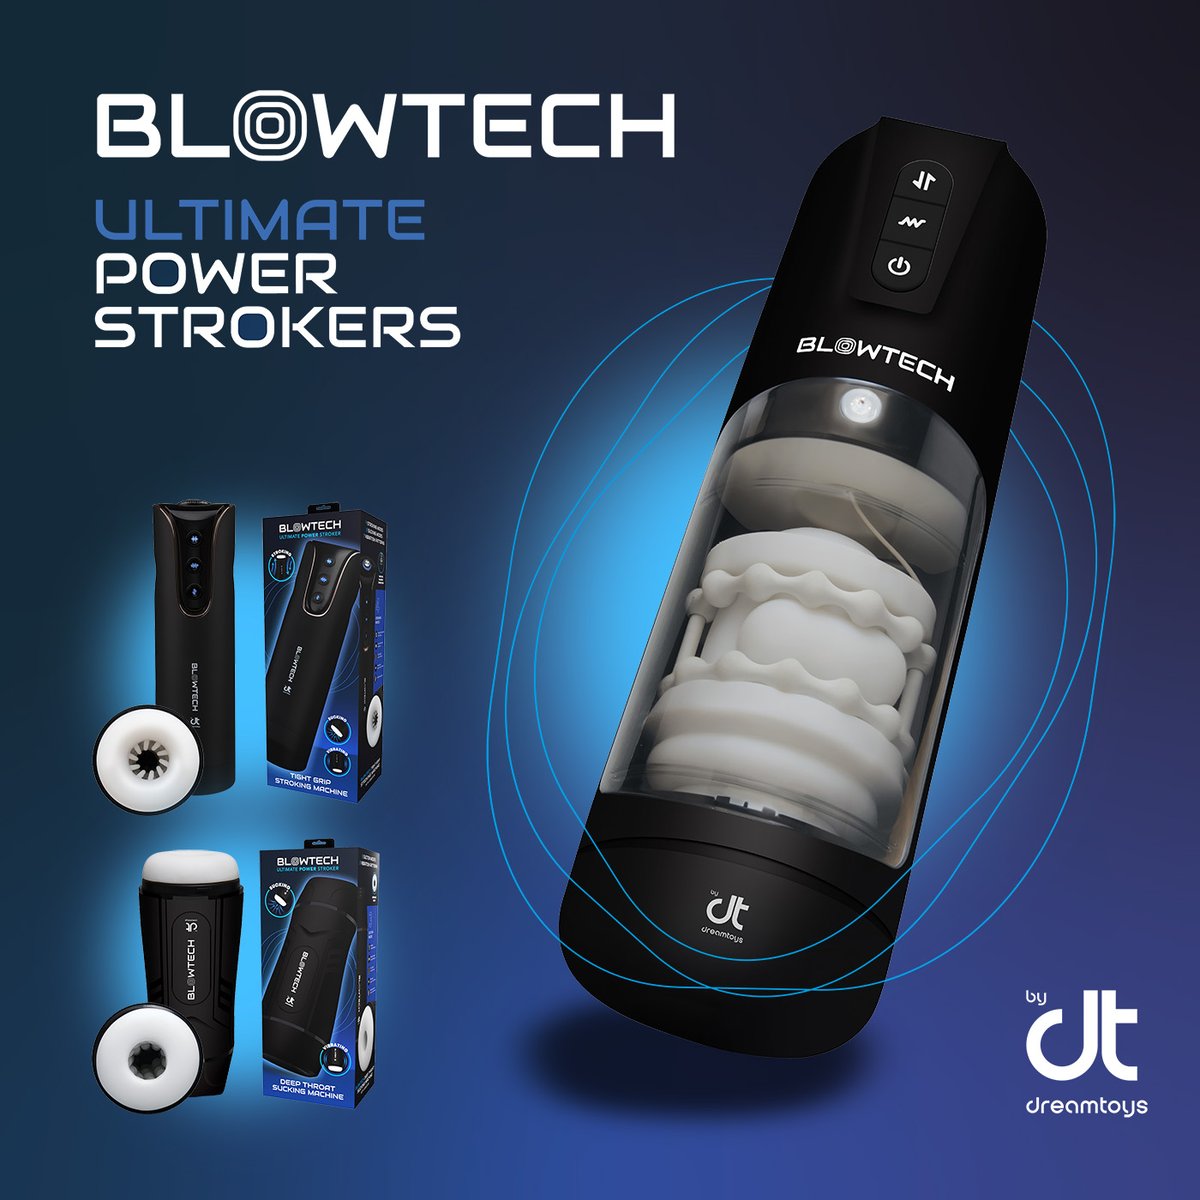 Add some innovation to solo play with the Blowtech automated strokers. Choose powerful vibration and stroking modes or the amazing throbs and tight tantalization of deep penetration with an internal warming sensation! 💙